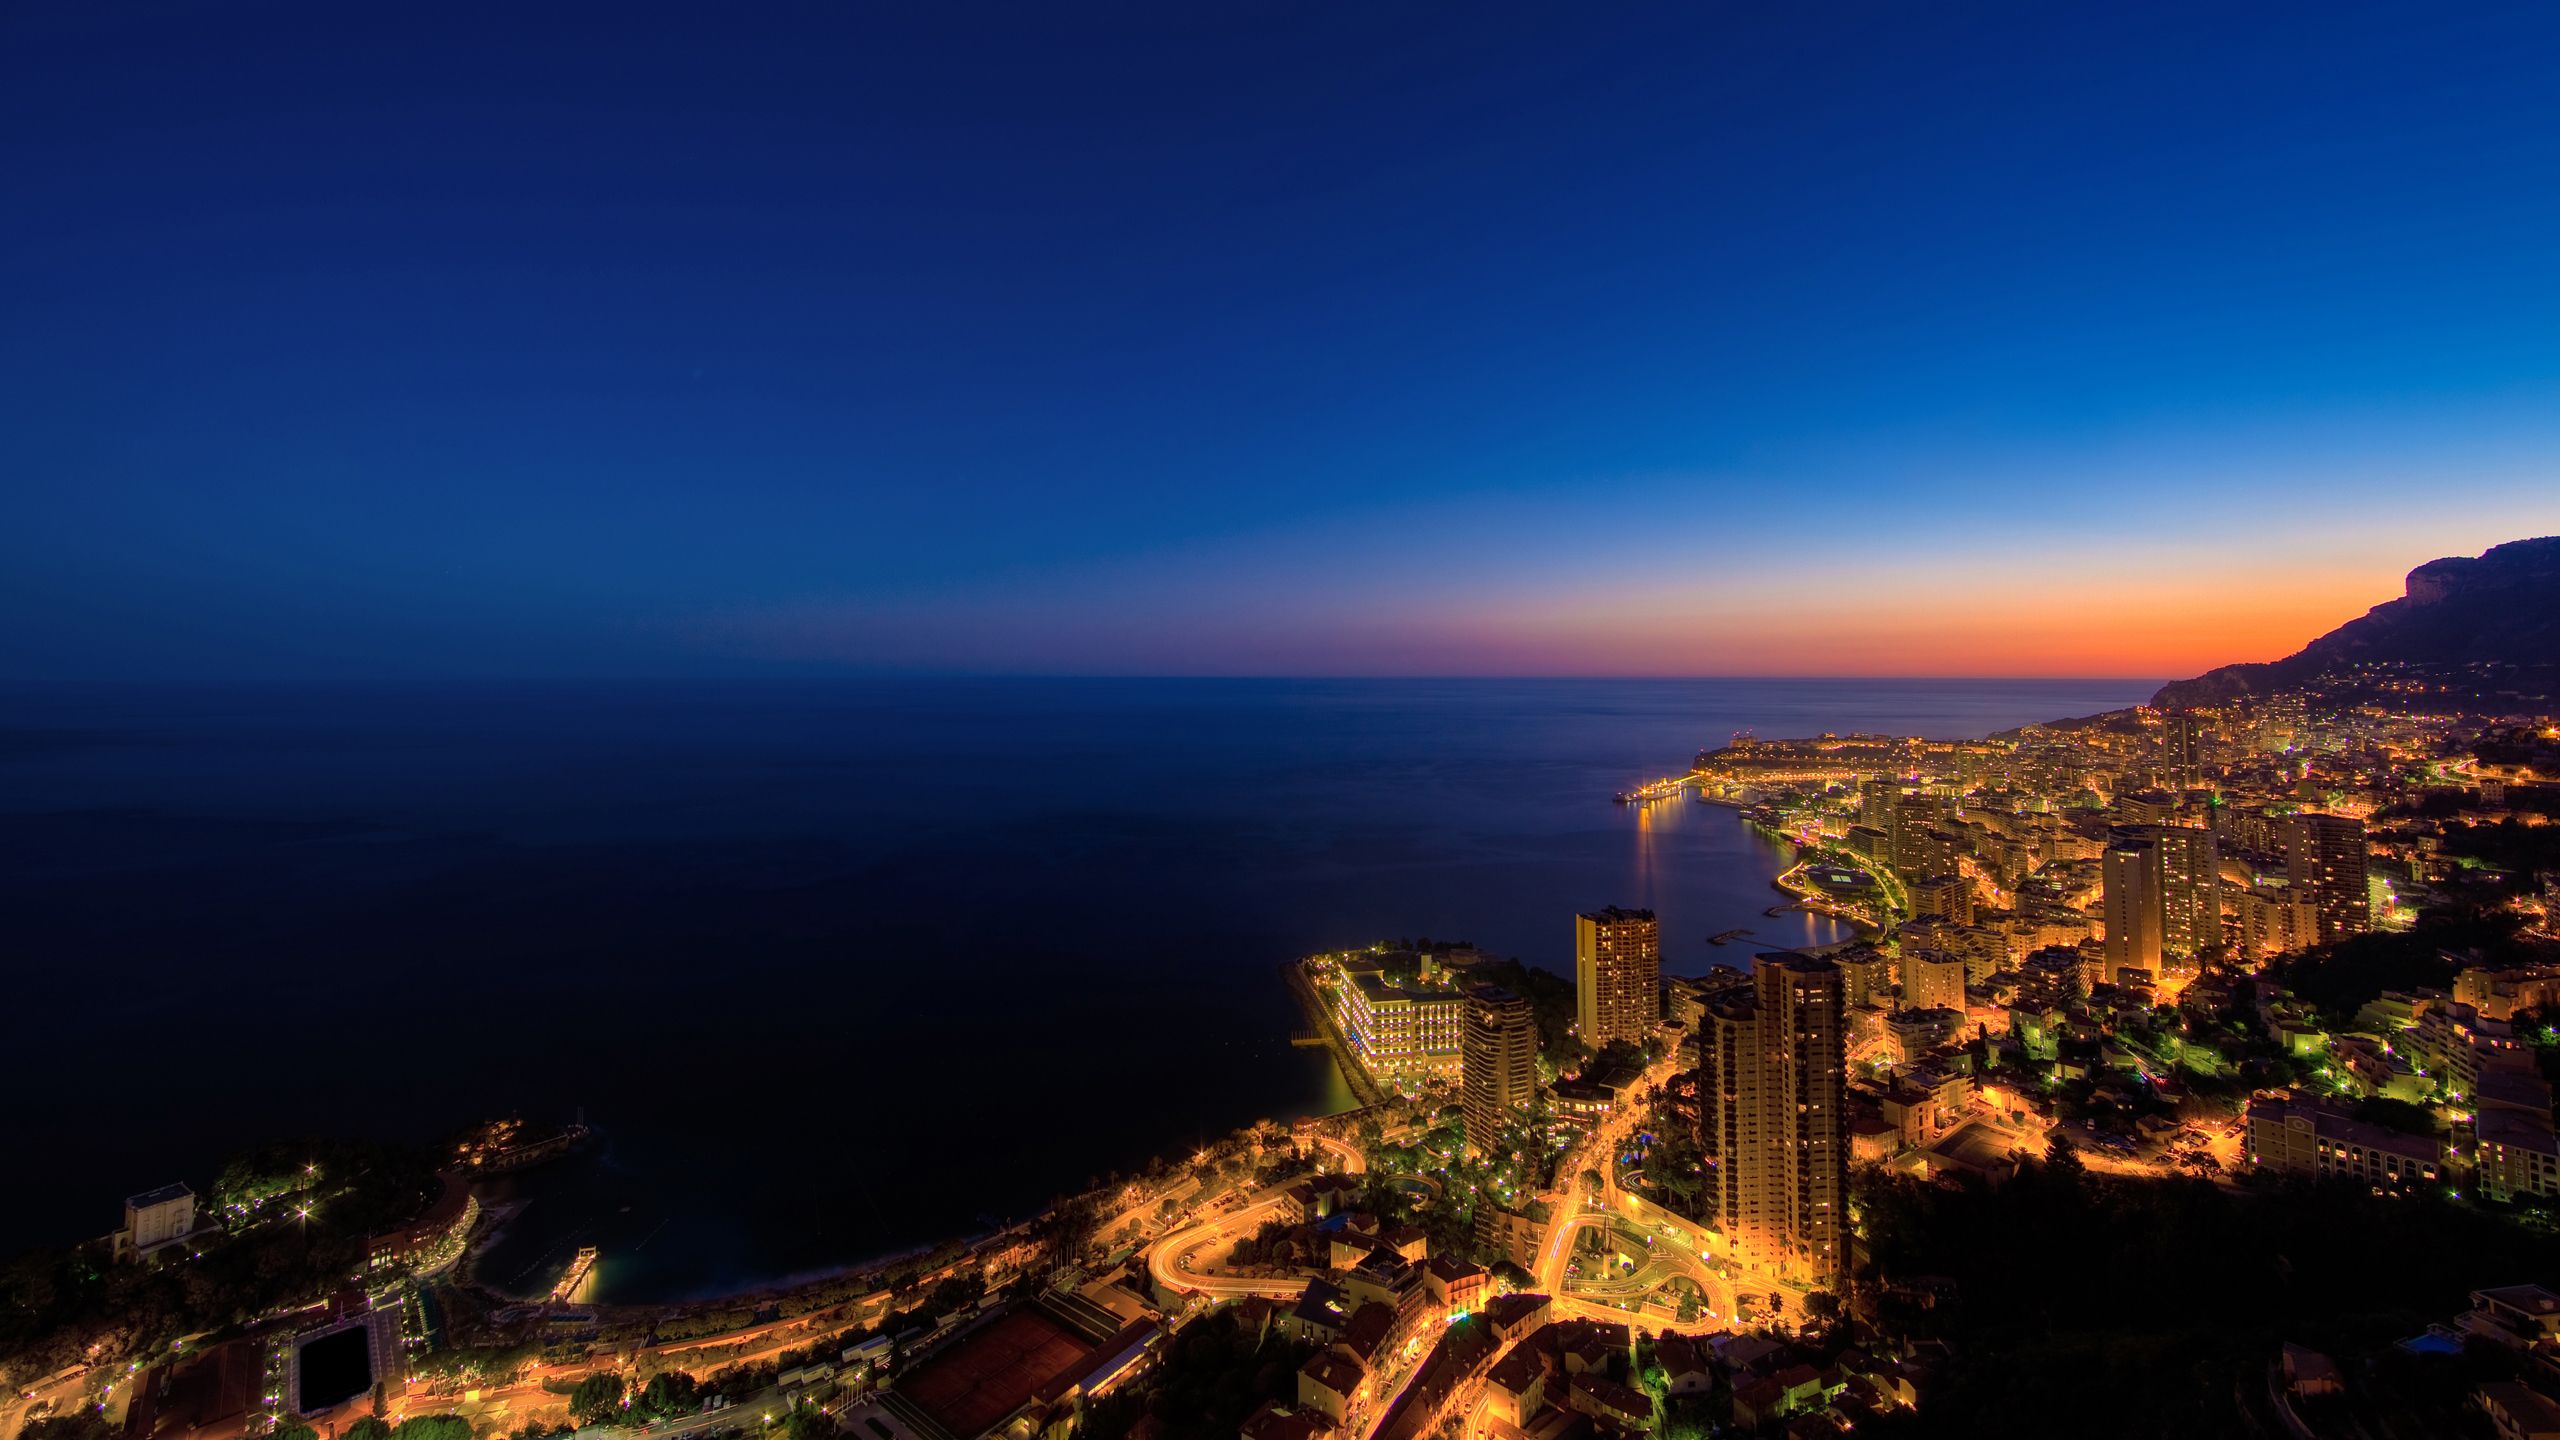 Night of the Cote d'Azur, France wallpaper and image